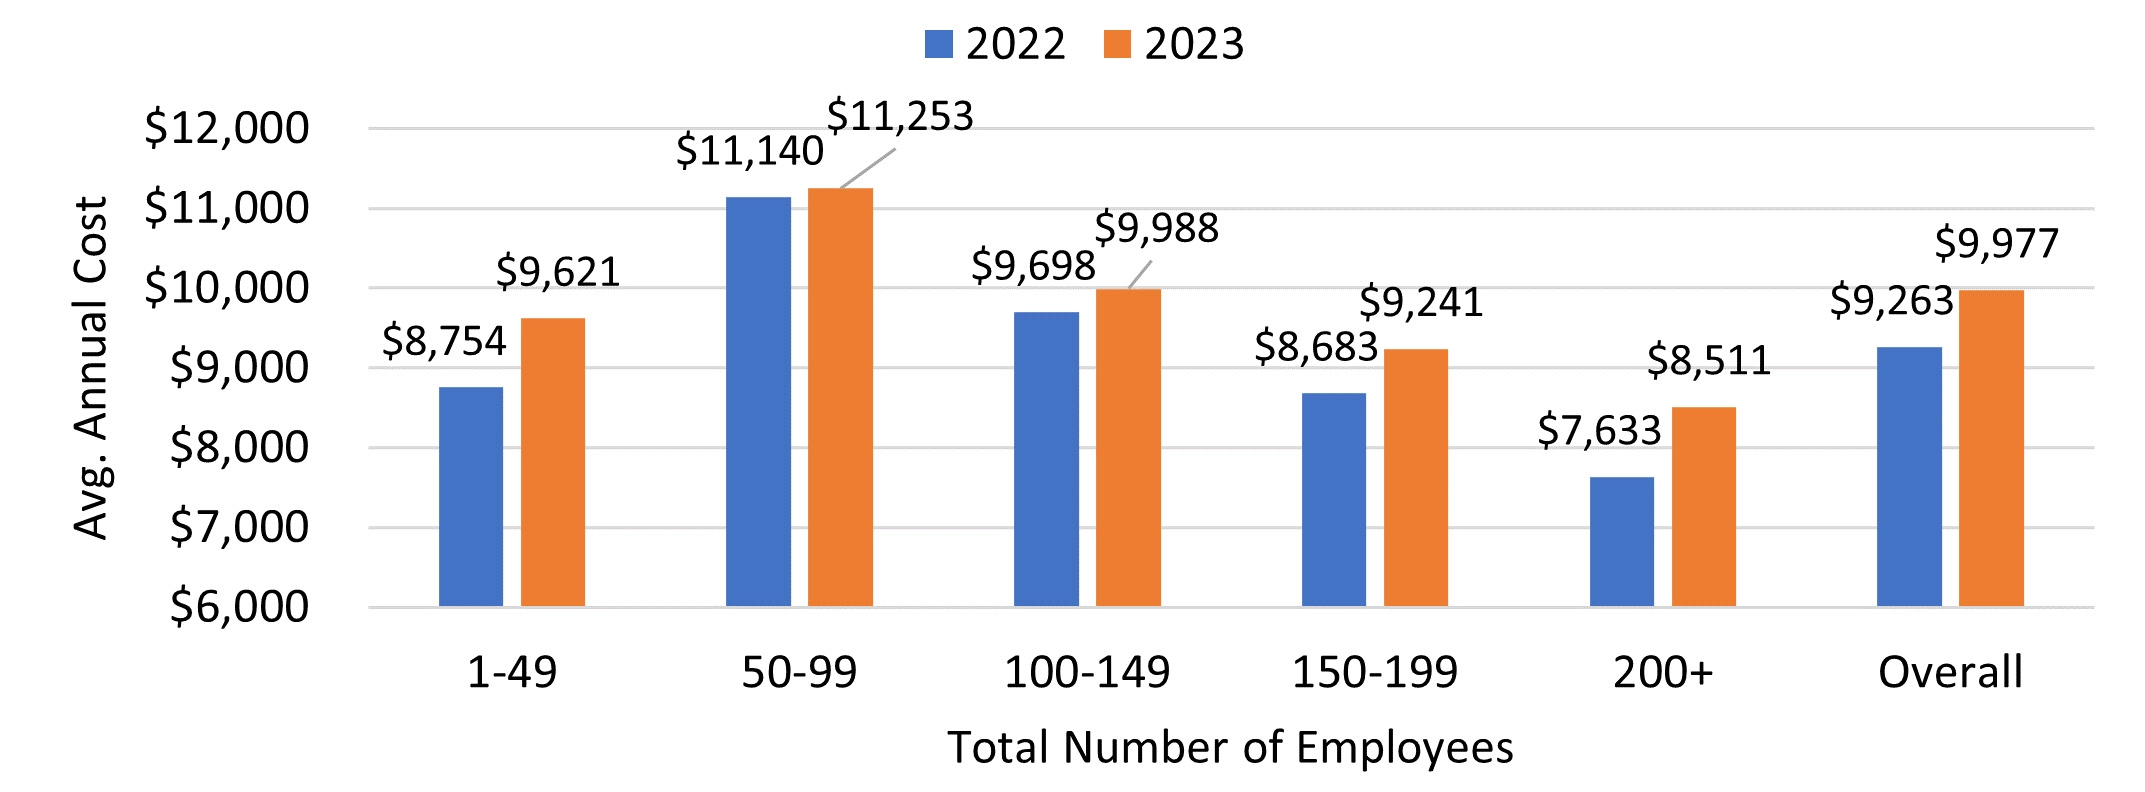  Fig. 1: Annual Cost per Participating Employee for Healthcare Coverage